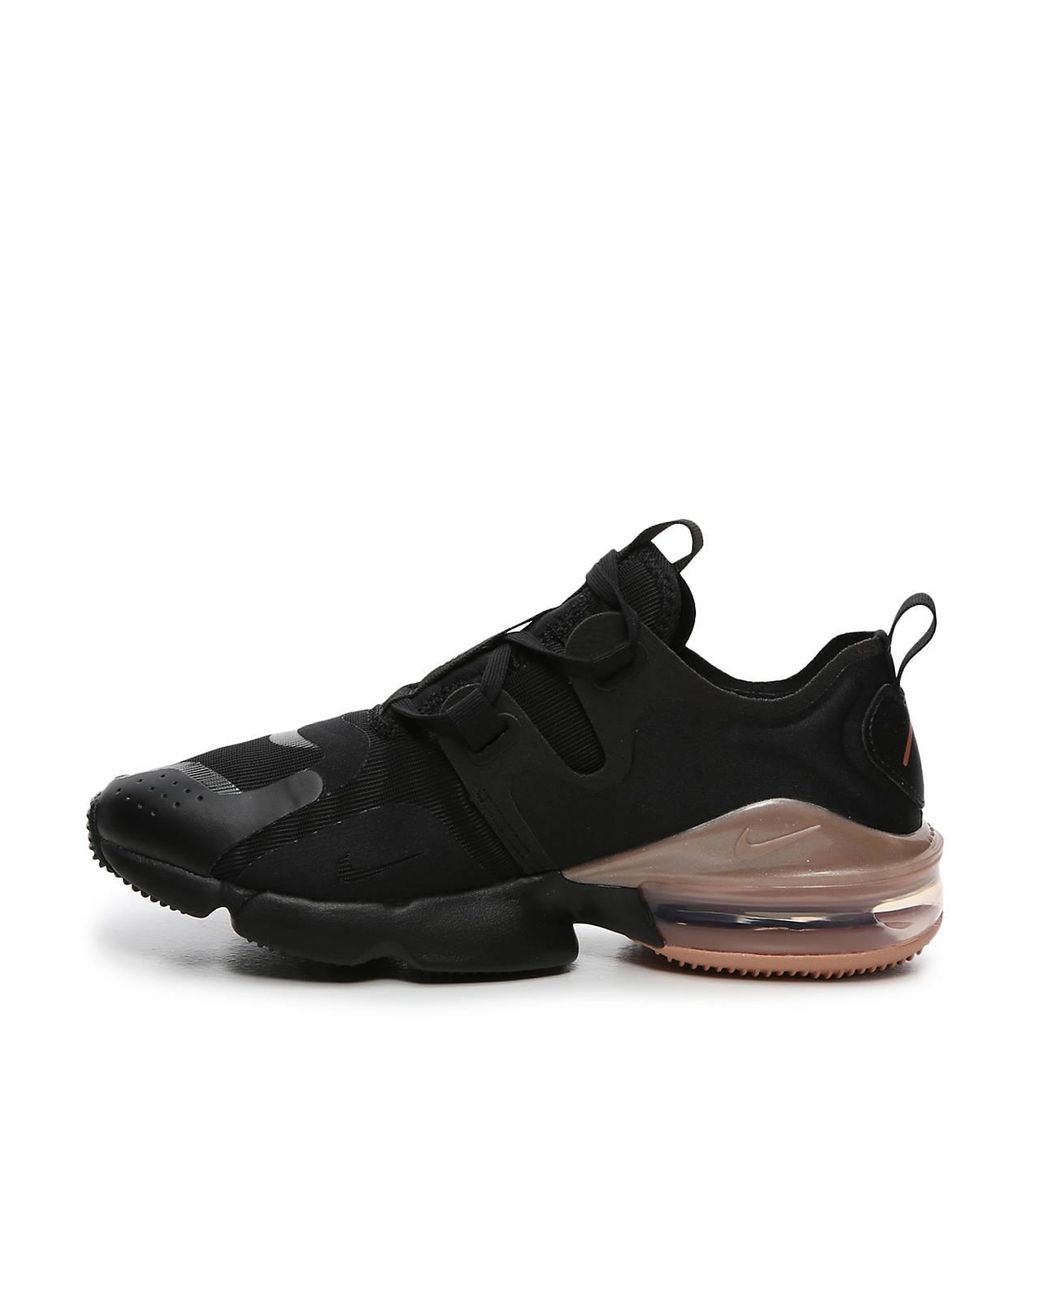 Nike Synthetic Air Max Infinity Sneaker in Black/Rose Gold (Black) | Lyst